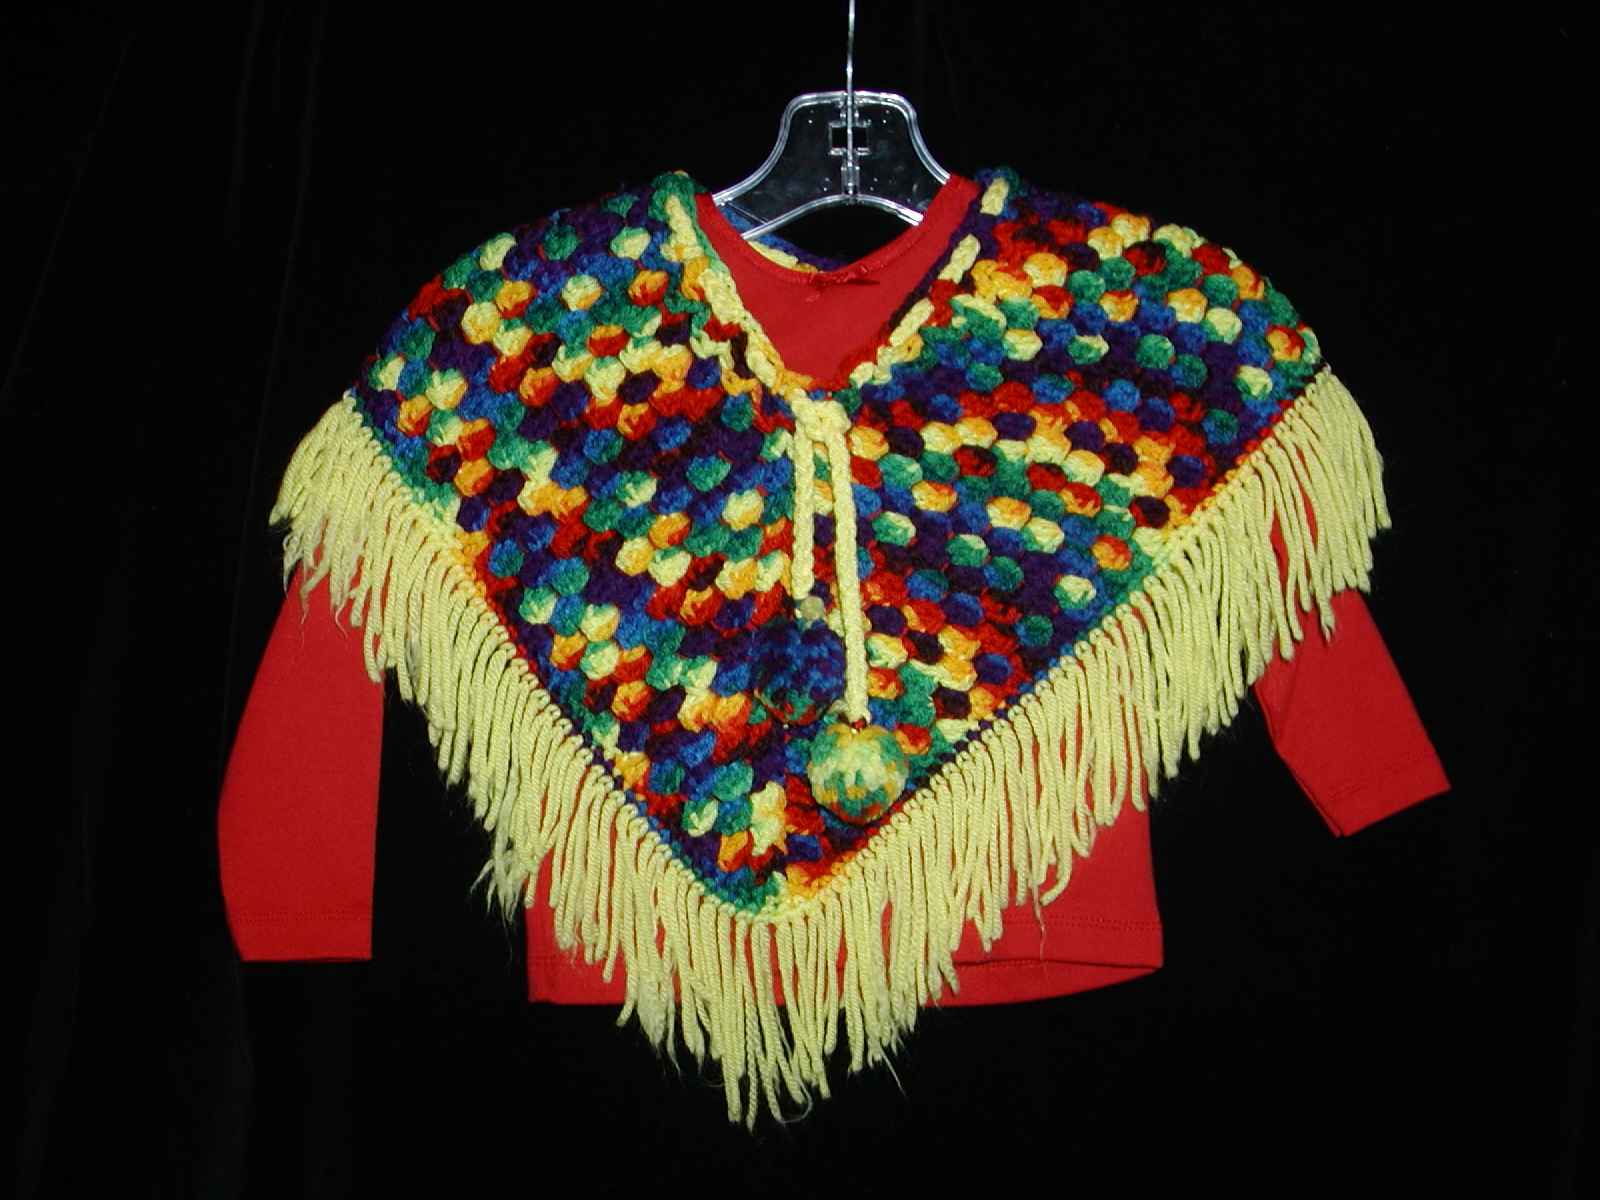 Hand-woven ponchos for little ninas